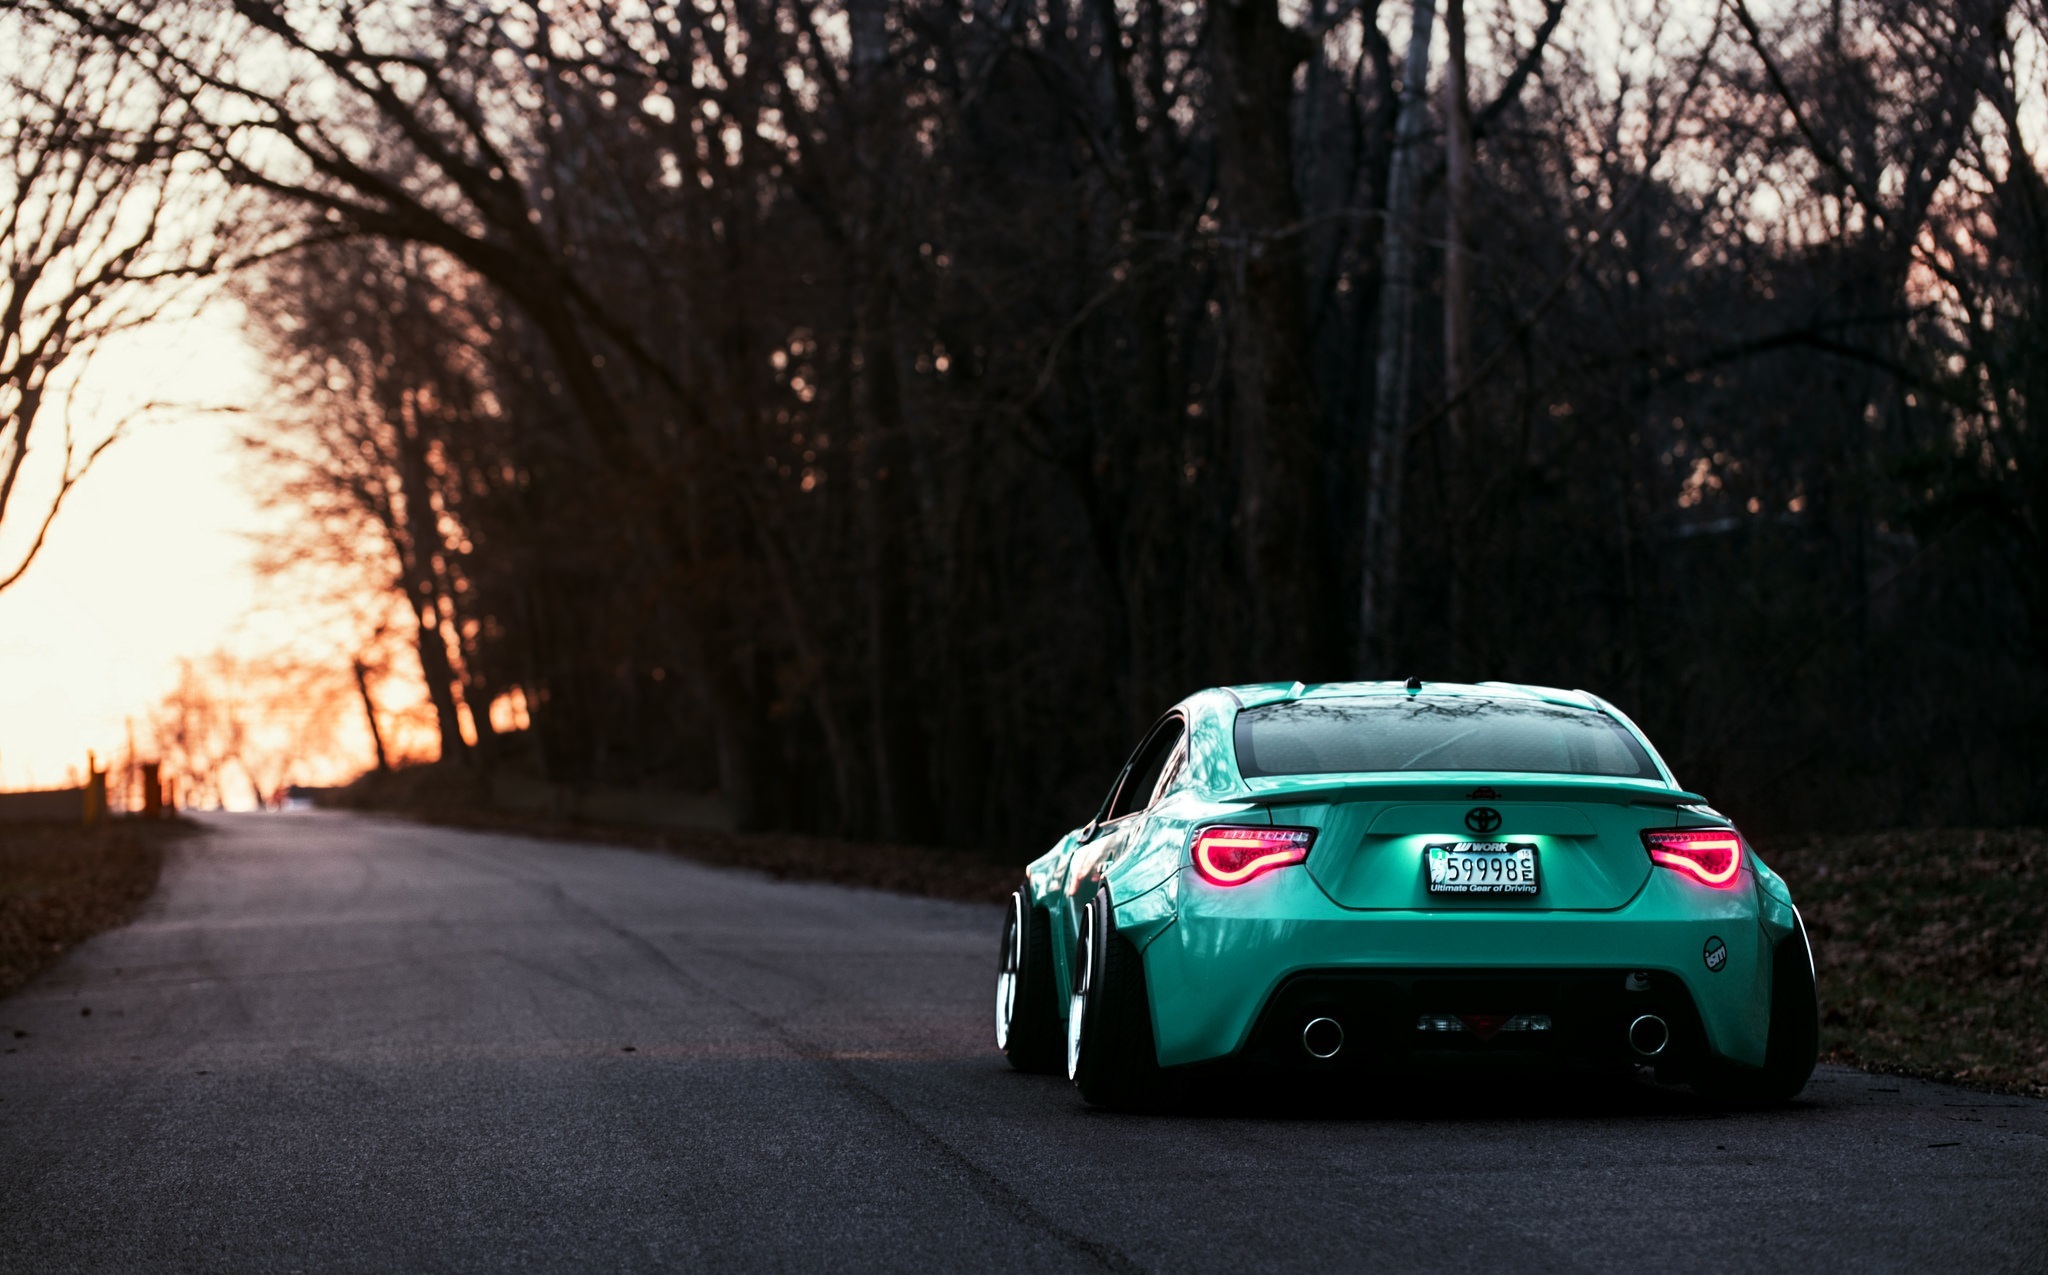 cars, back view, toyota, evening, rear view, gt86